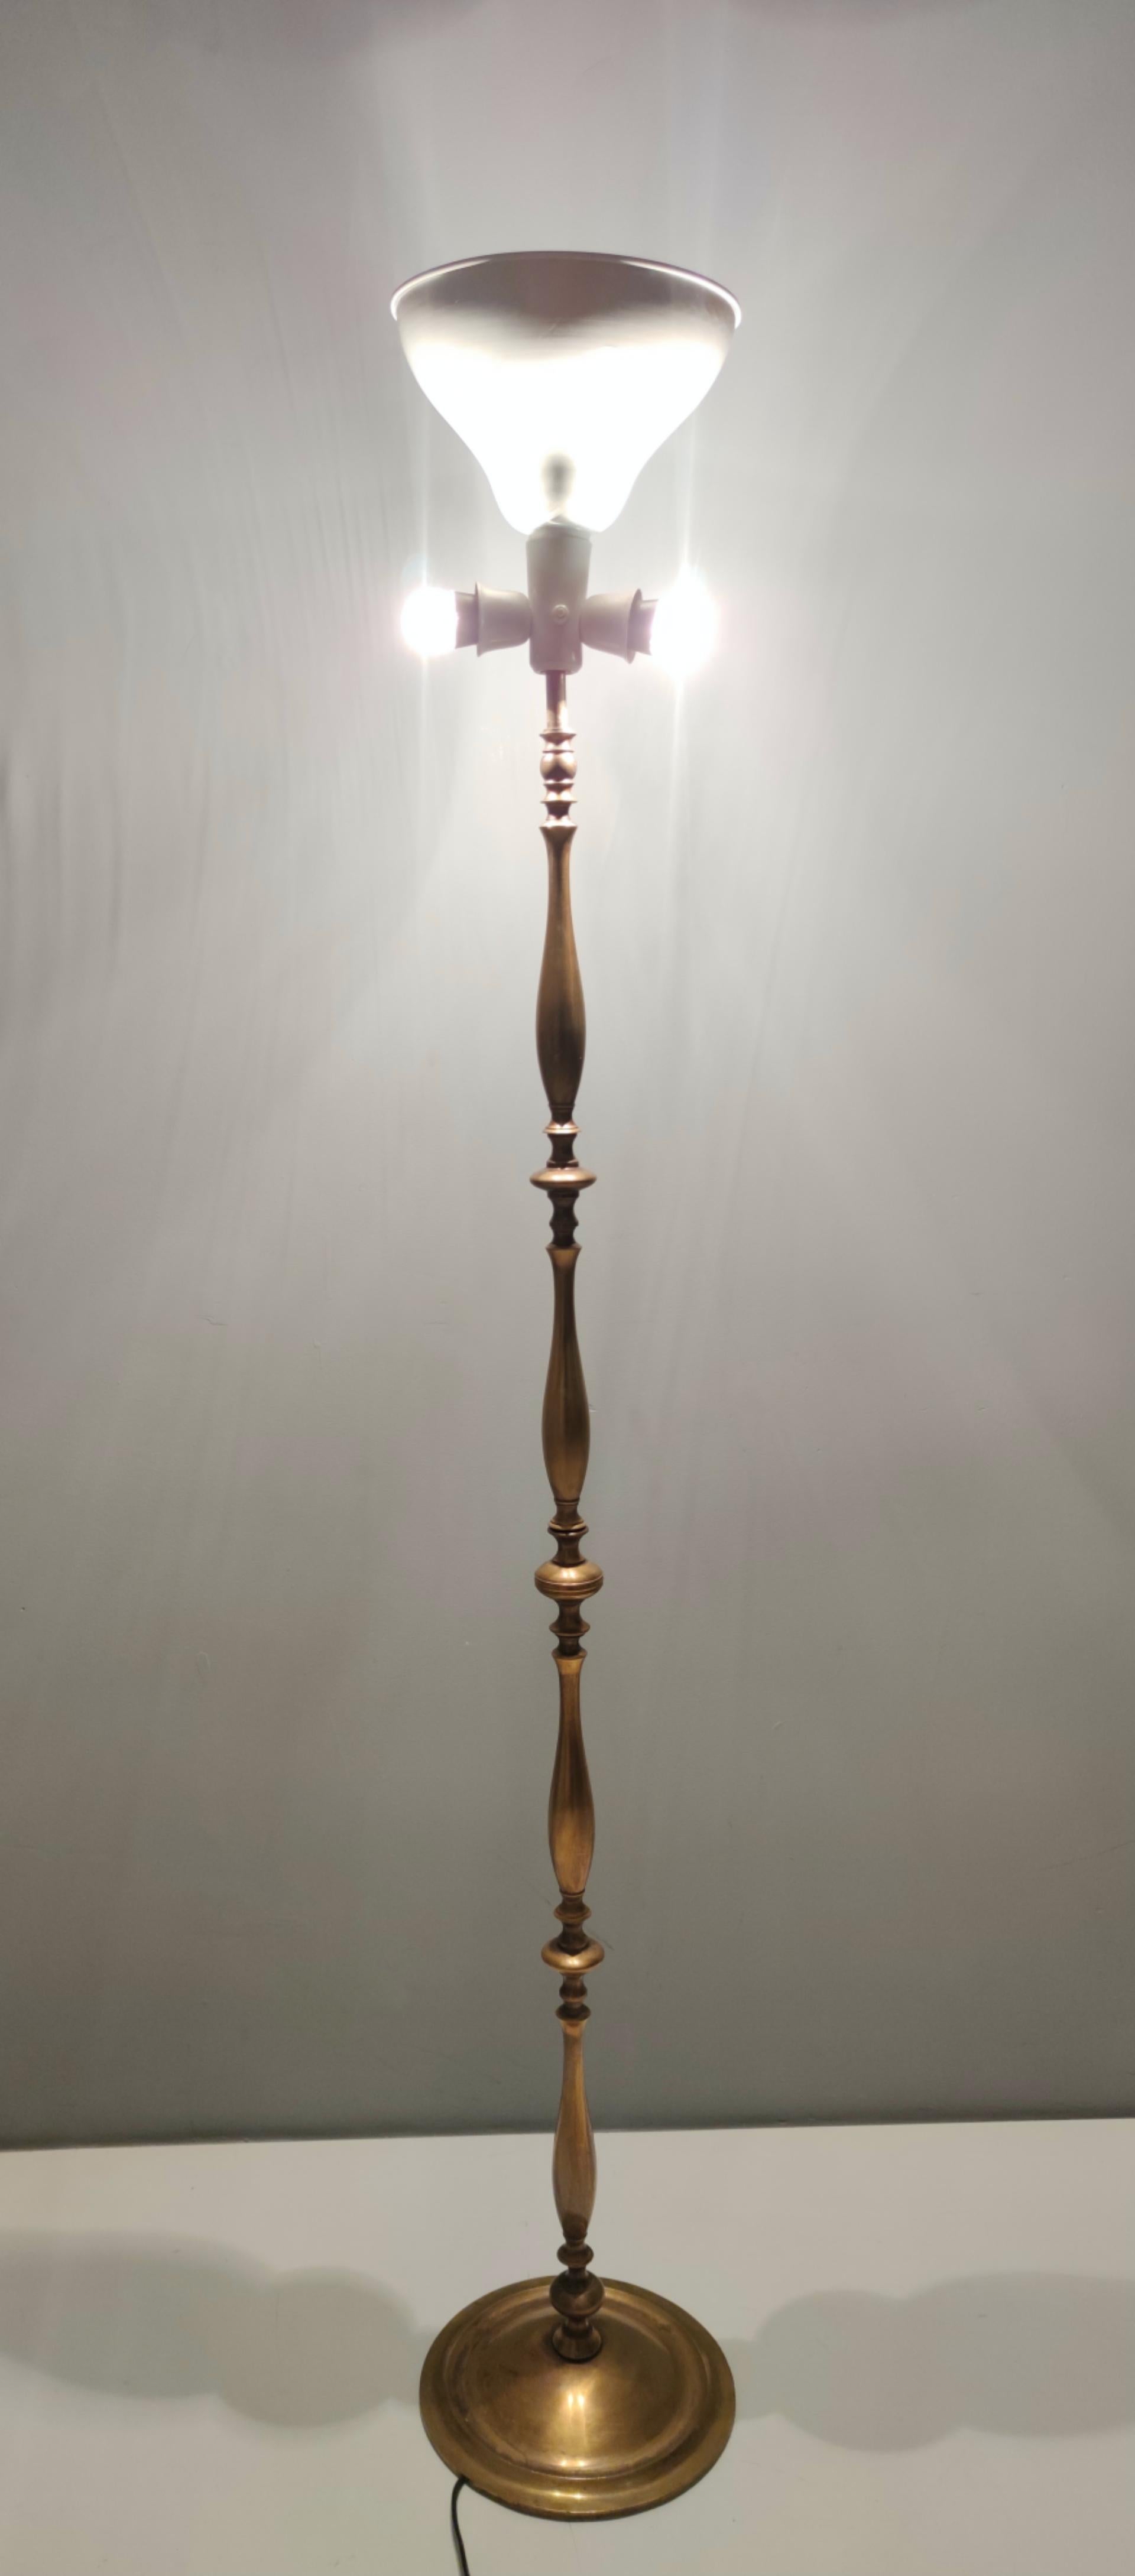 Mid-20th Century Vintage Turned Brass and Steel Floor Lamp with a Decorated Lampshade, Italy